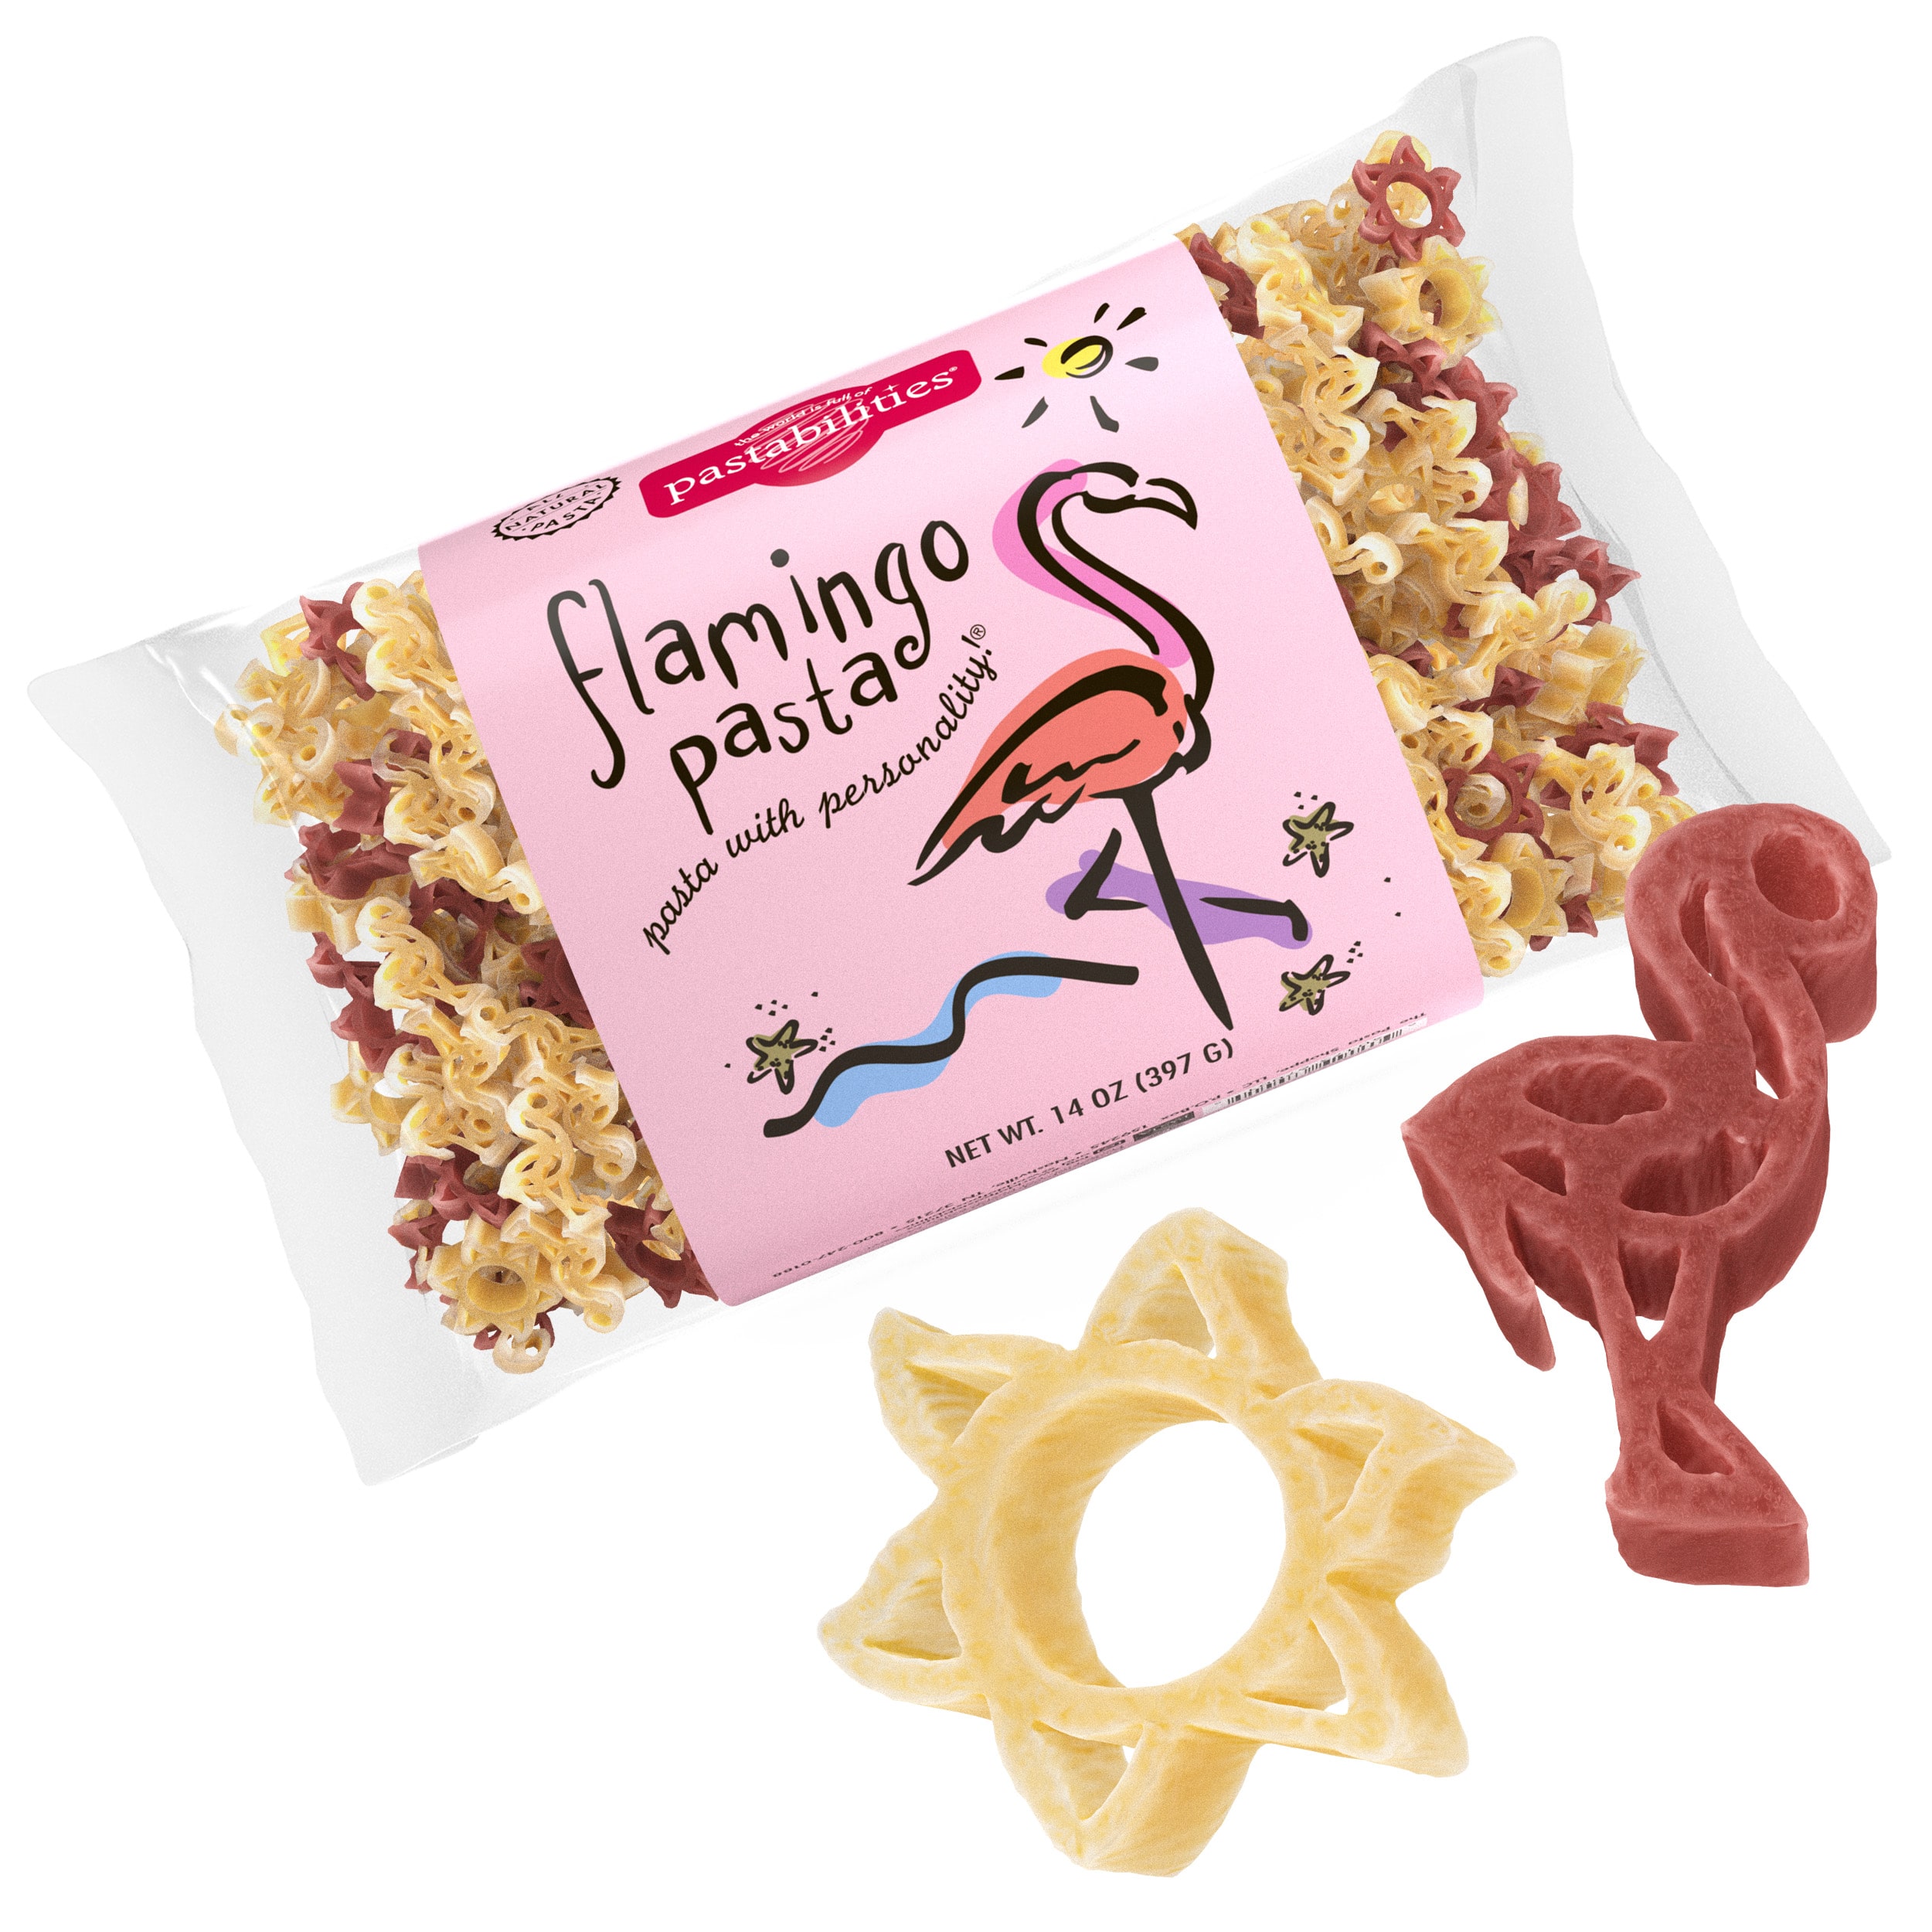 pasta house chicken flamingo pictures